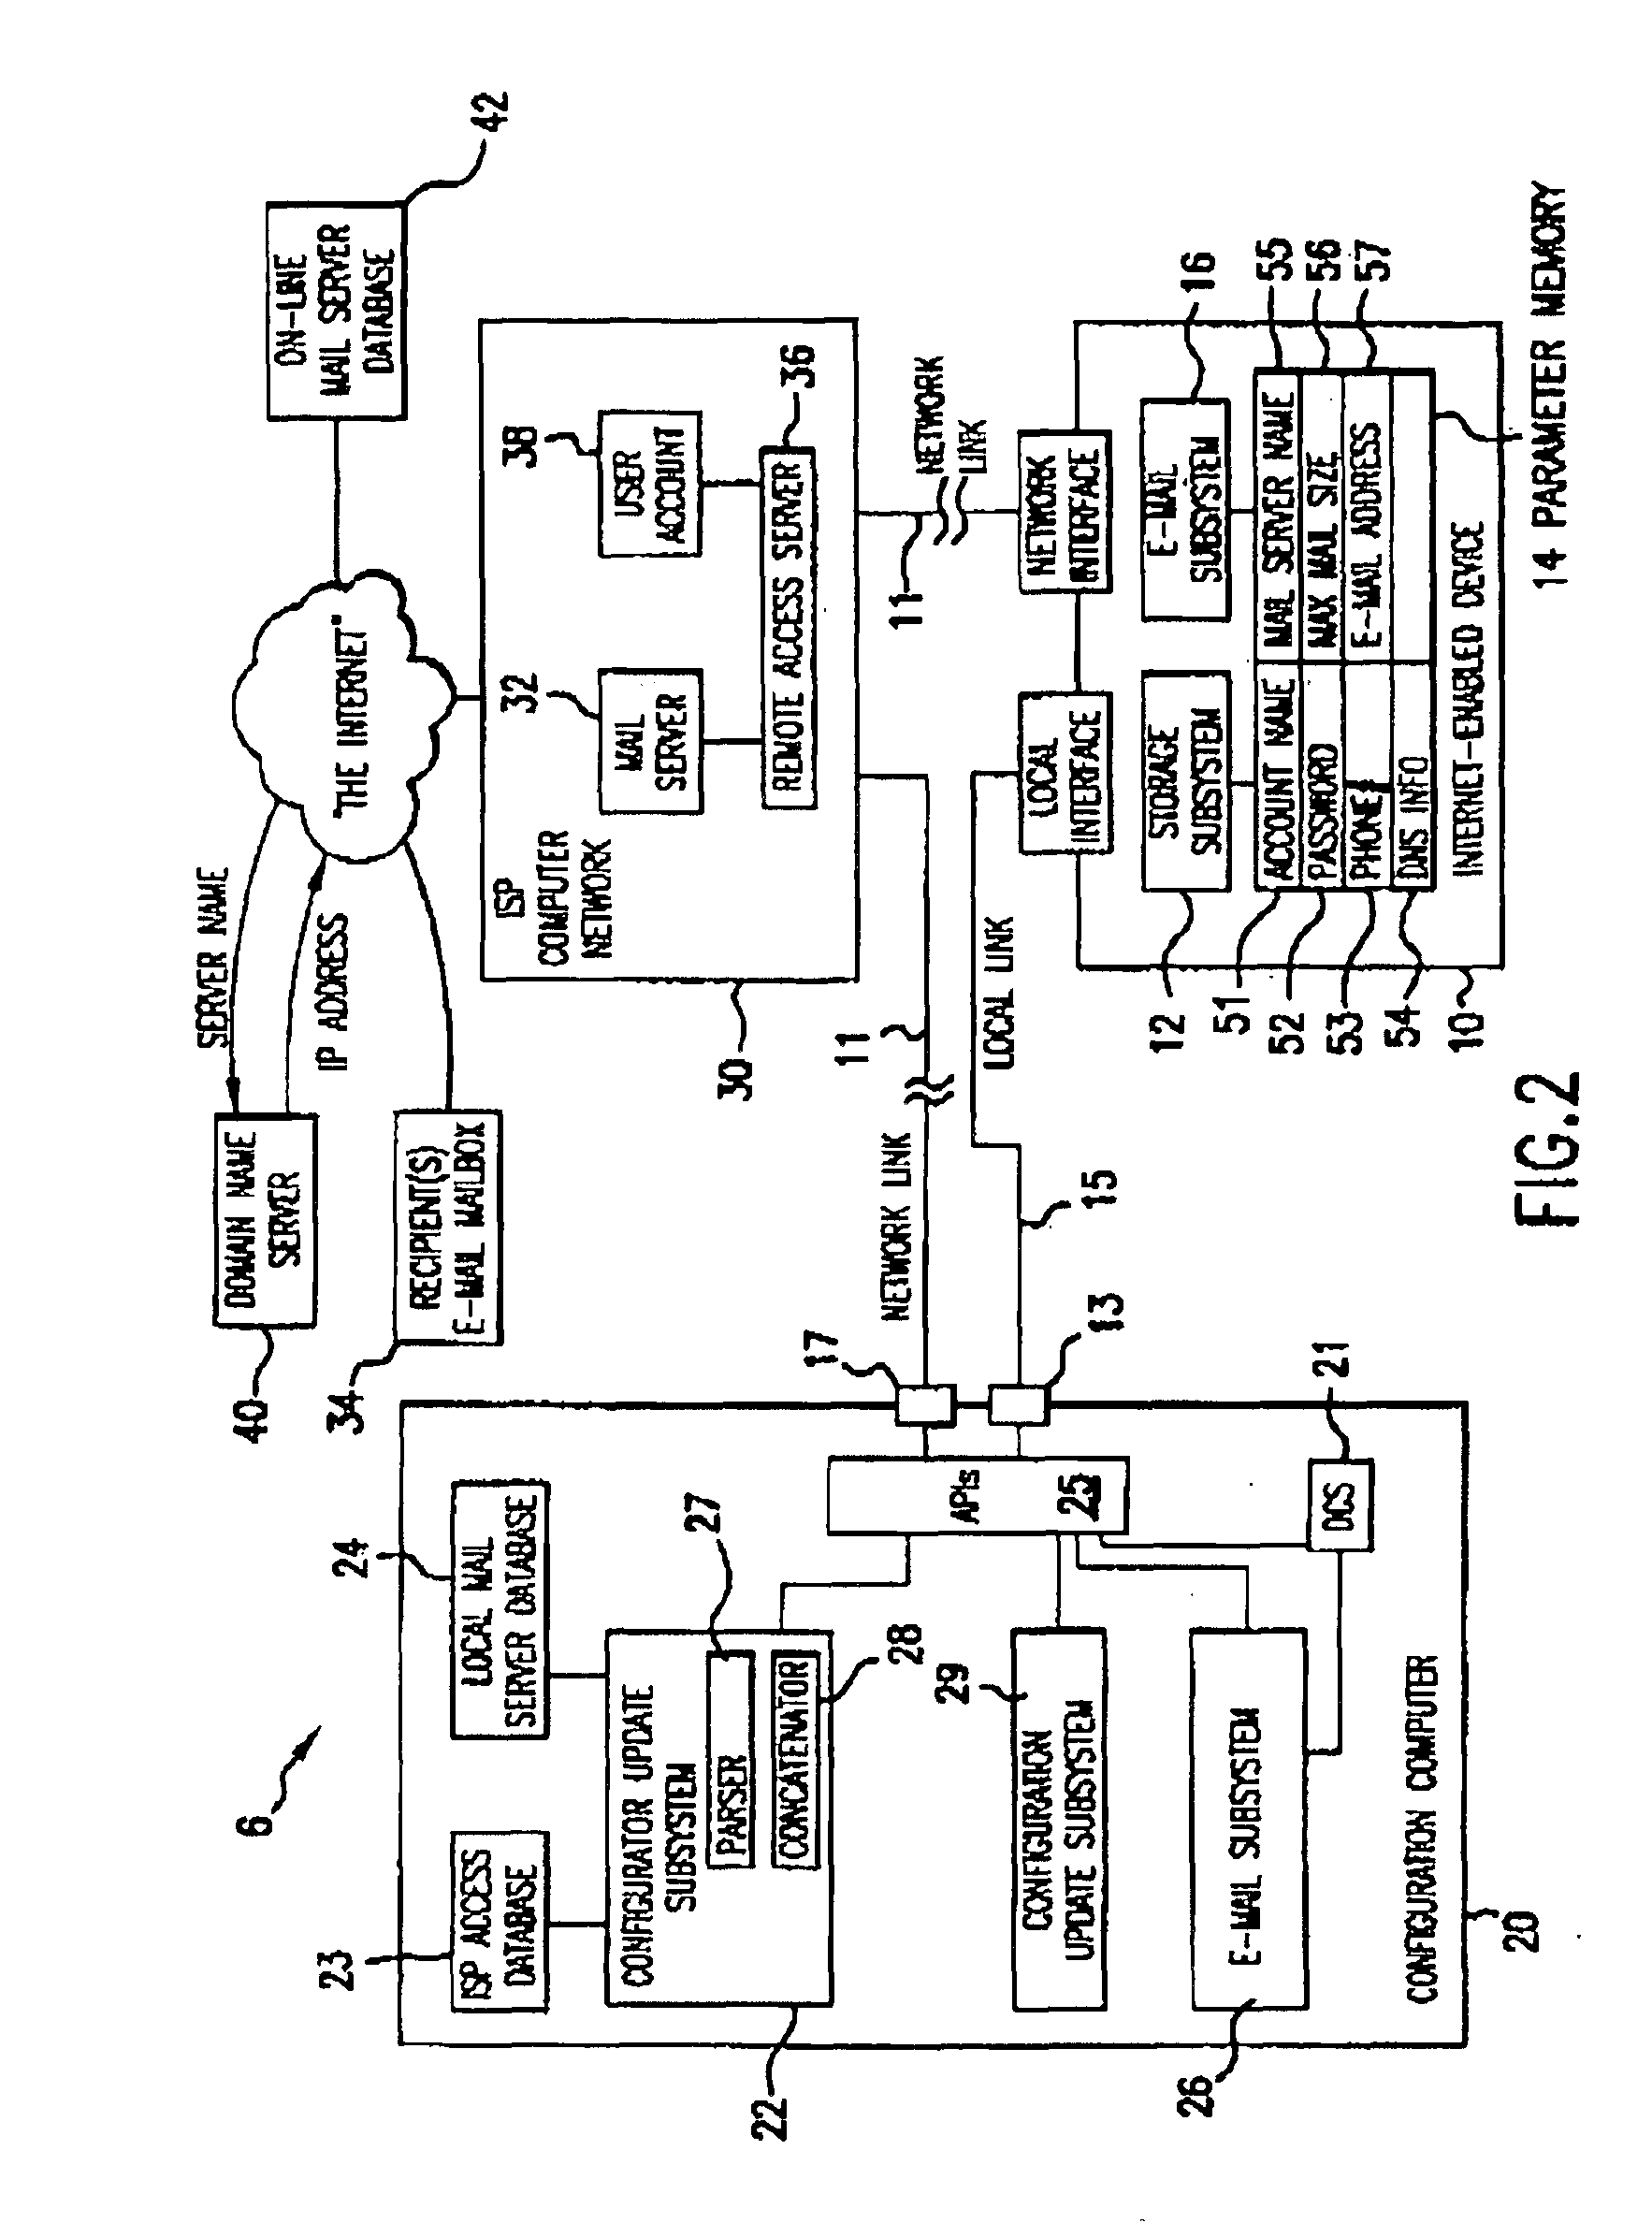 Simplified configuration of an internet-enabled device